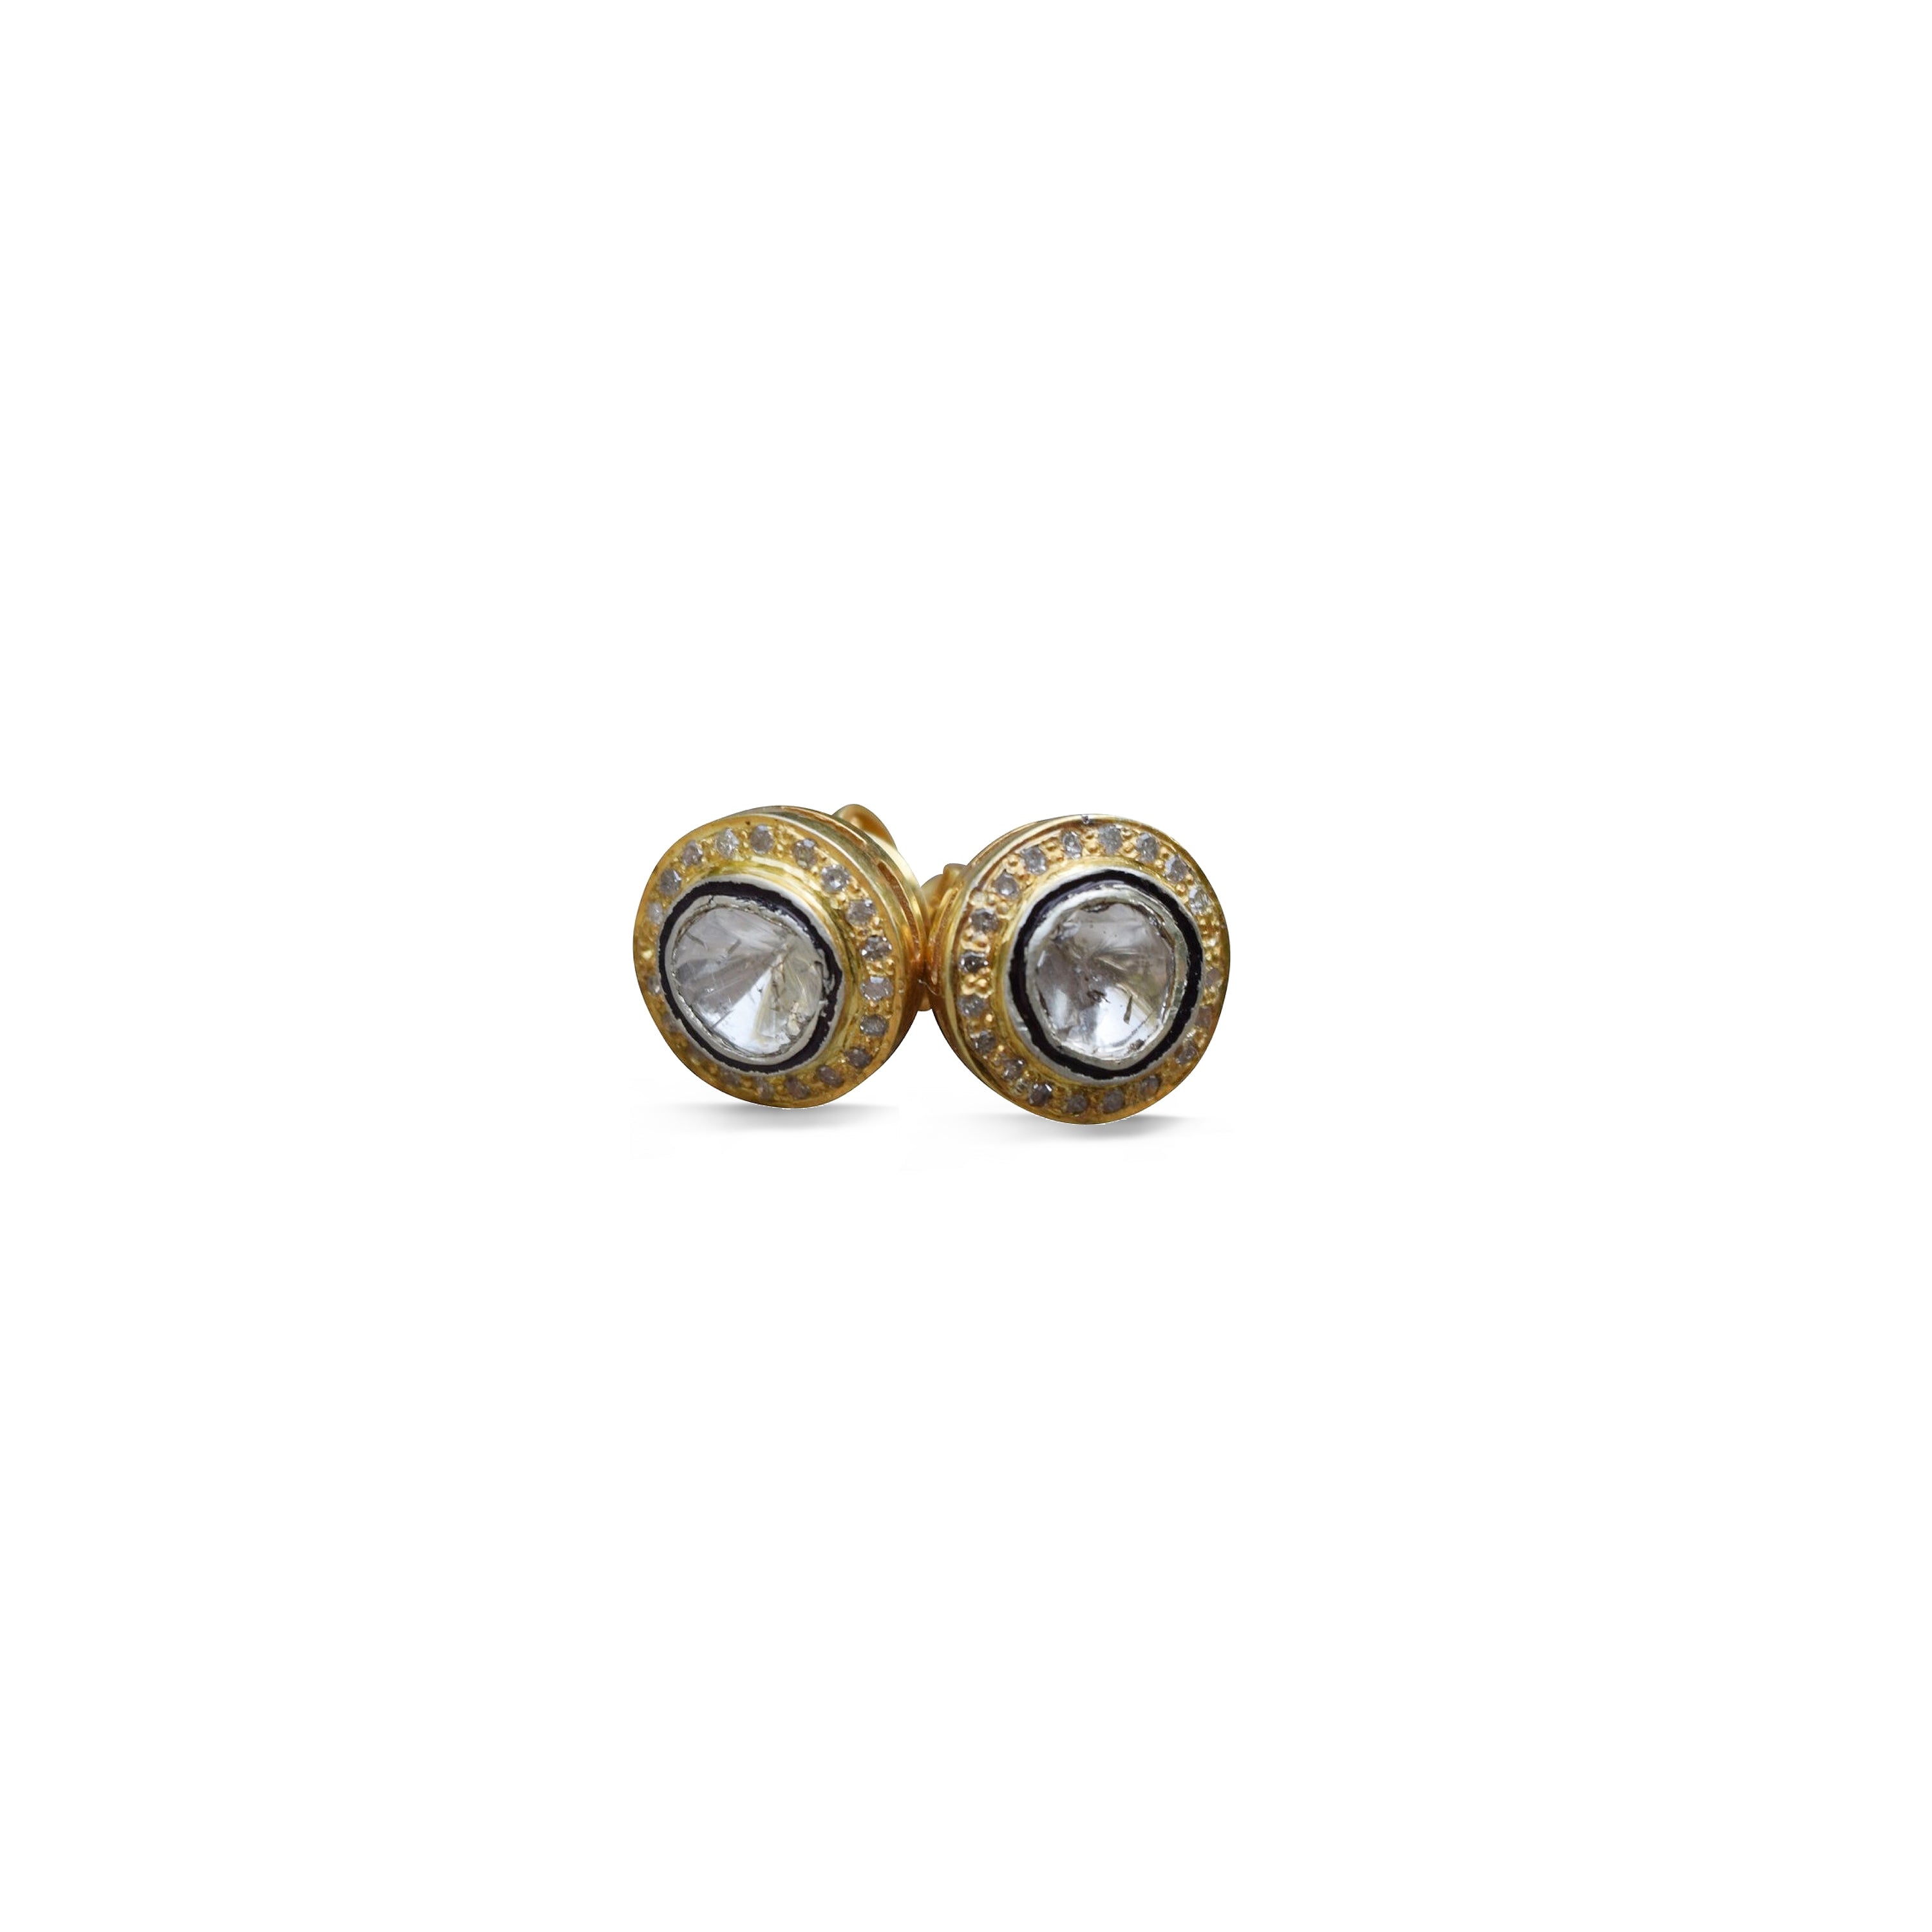 Sliced Diamond + Pave Stud Earrings Gold Plate by S.Carter Designs